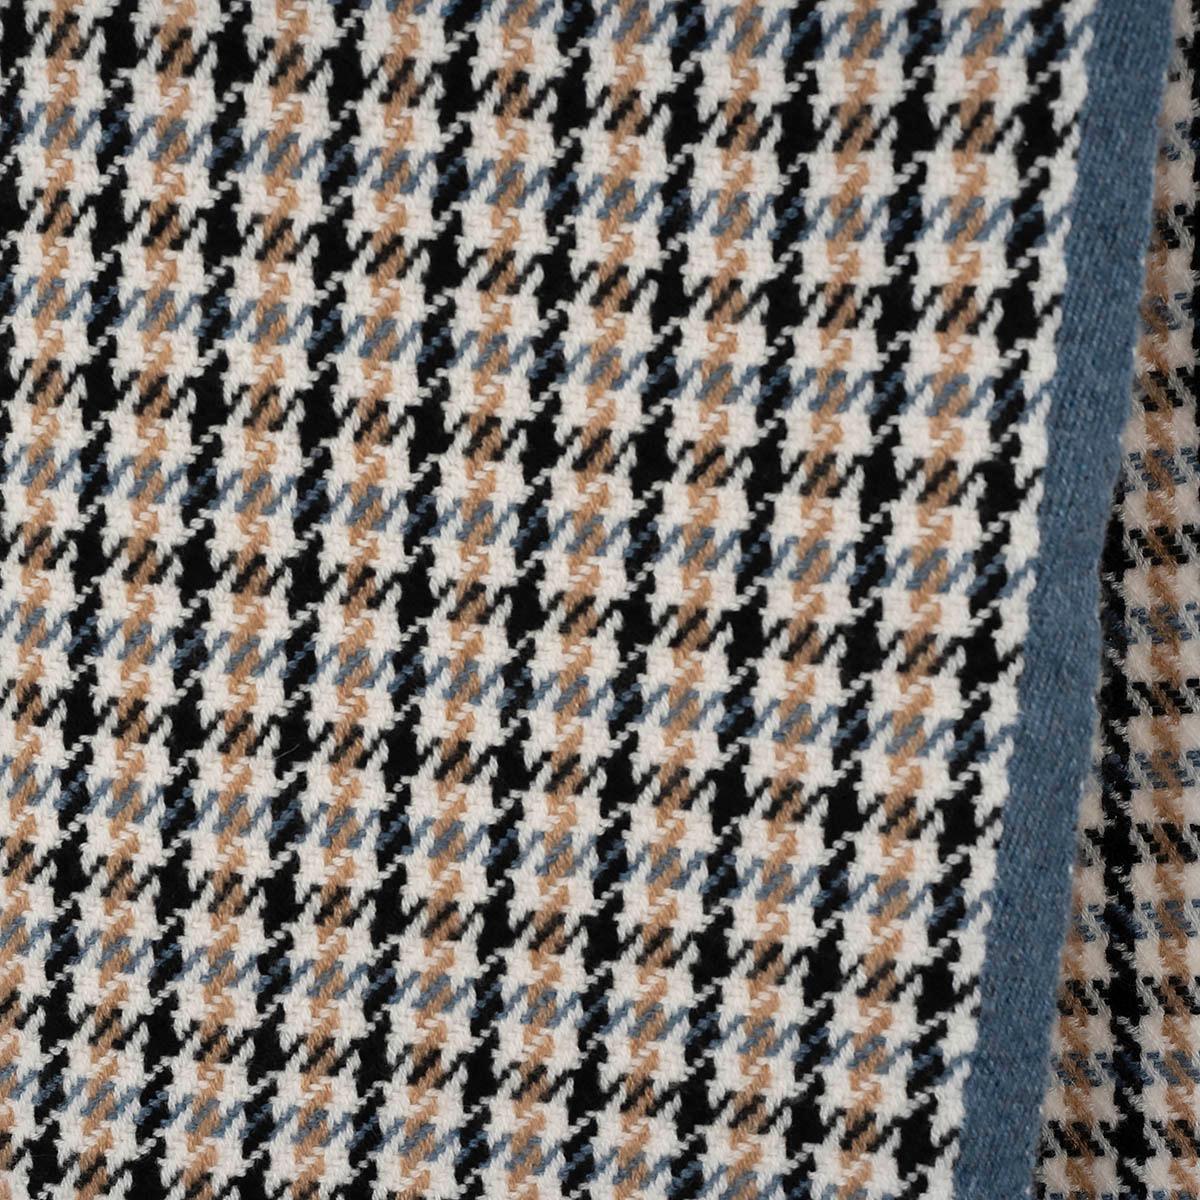 100% authentic Loro Piana Houndstooth fringe muffler in beige, cream, black, and blue cashmere (100%). Has been worn and is in excellent condition. 

Measurements
Width	45cm (17.6in)
Length	200cm (78in)

All our listings include only the listed item